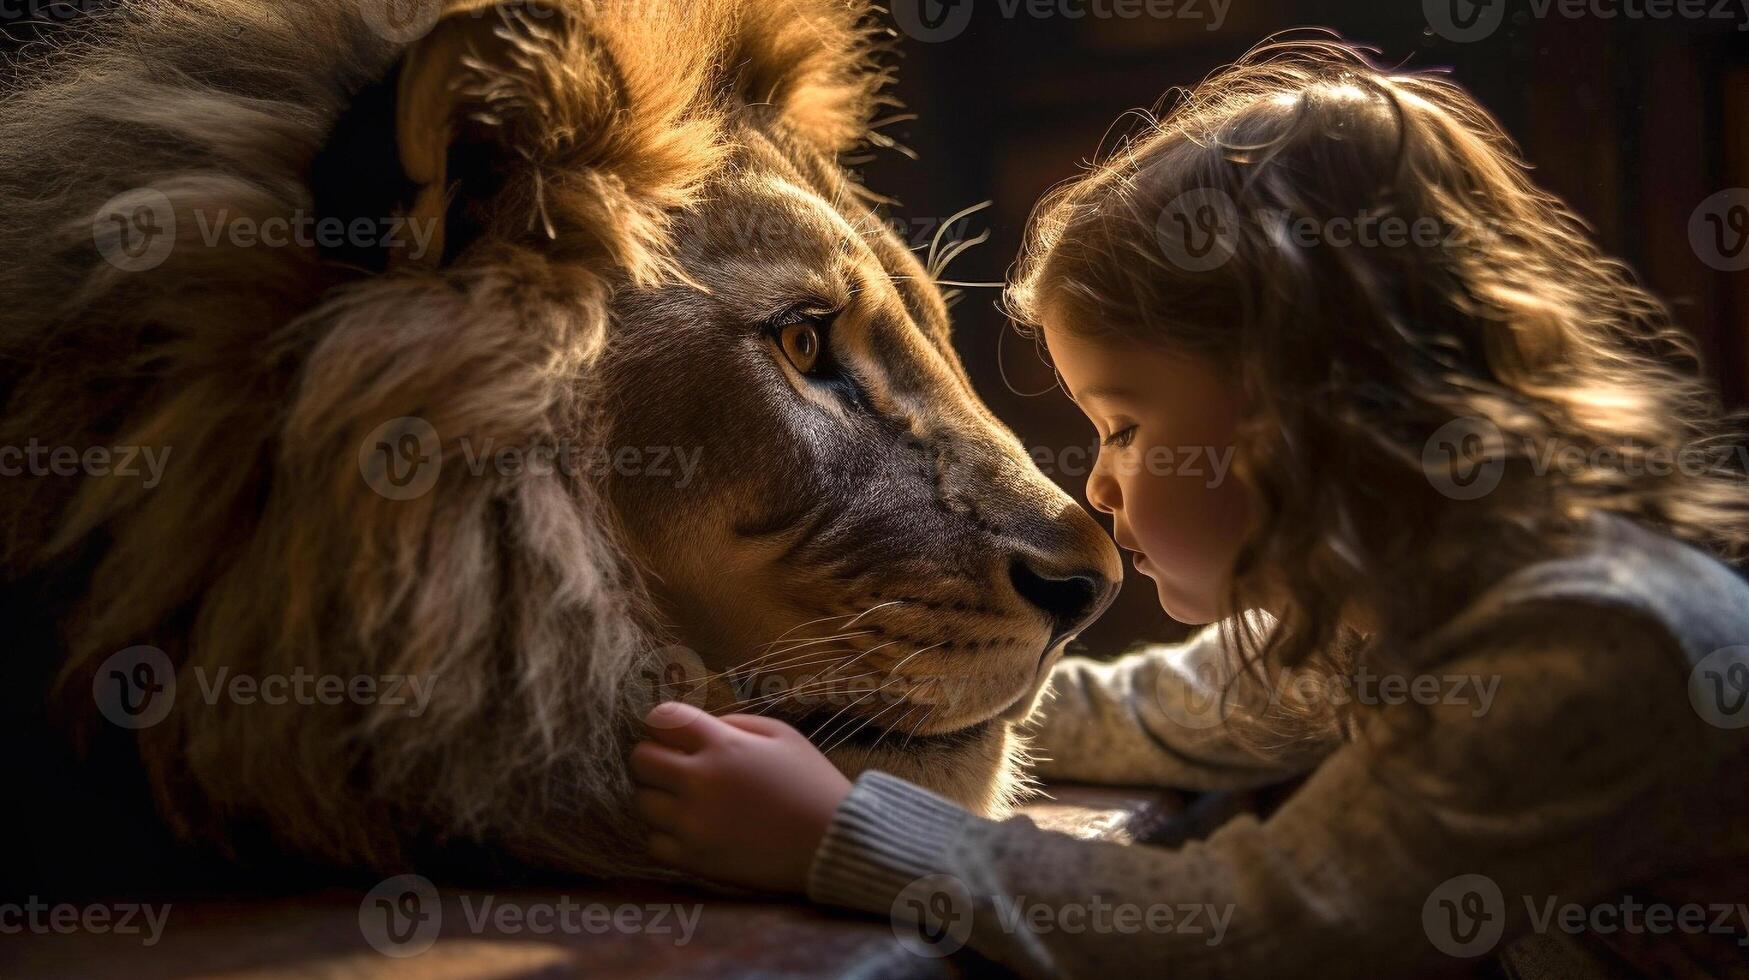 Profile of A Fearless Young Female Child Gently Touching The Face of A Very Large Lion - . photo